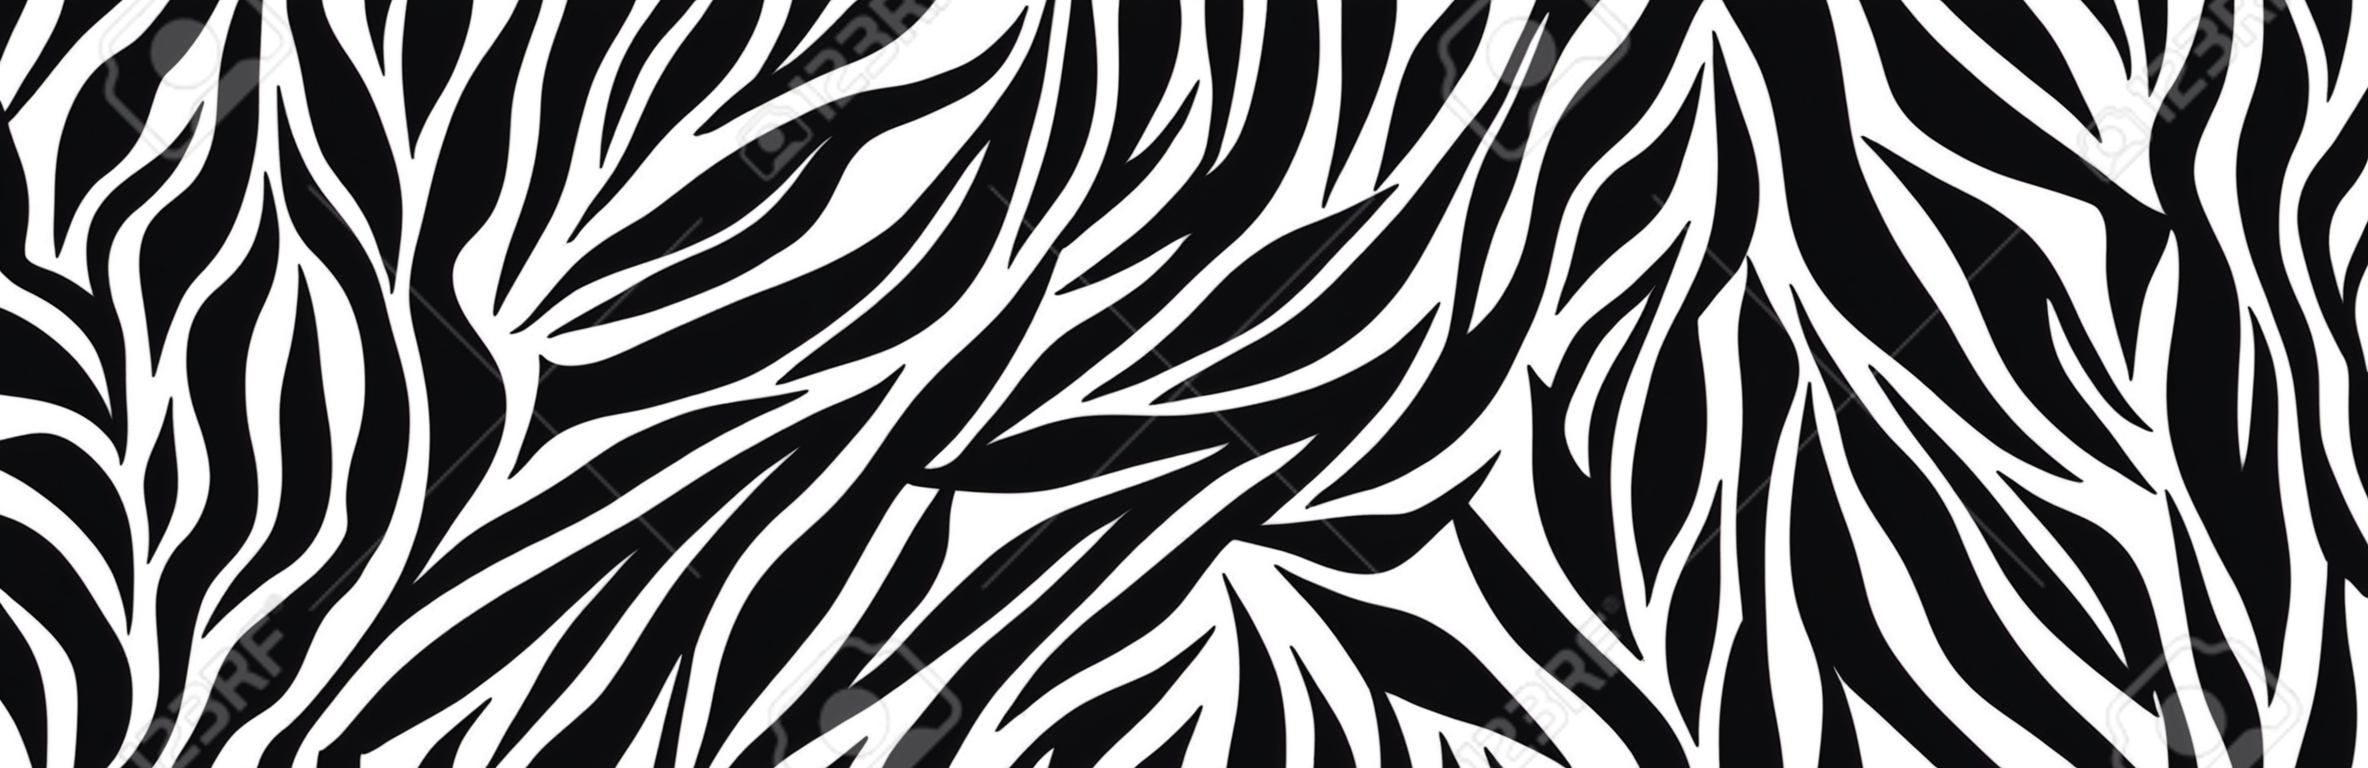 Zebra pattern, stylish stripes texture. Animal natural print. For the design of wallpaper, textile, cover. Vector seamless background